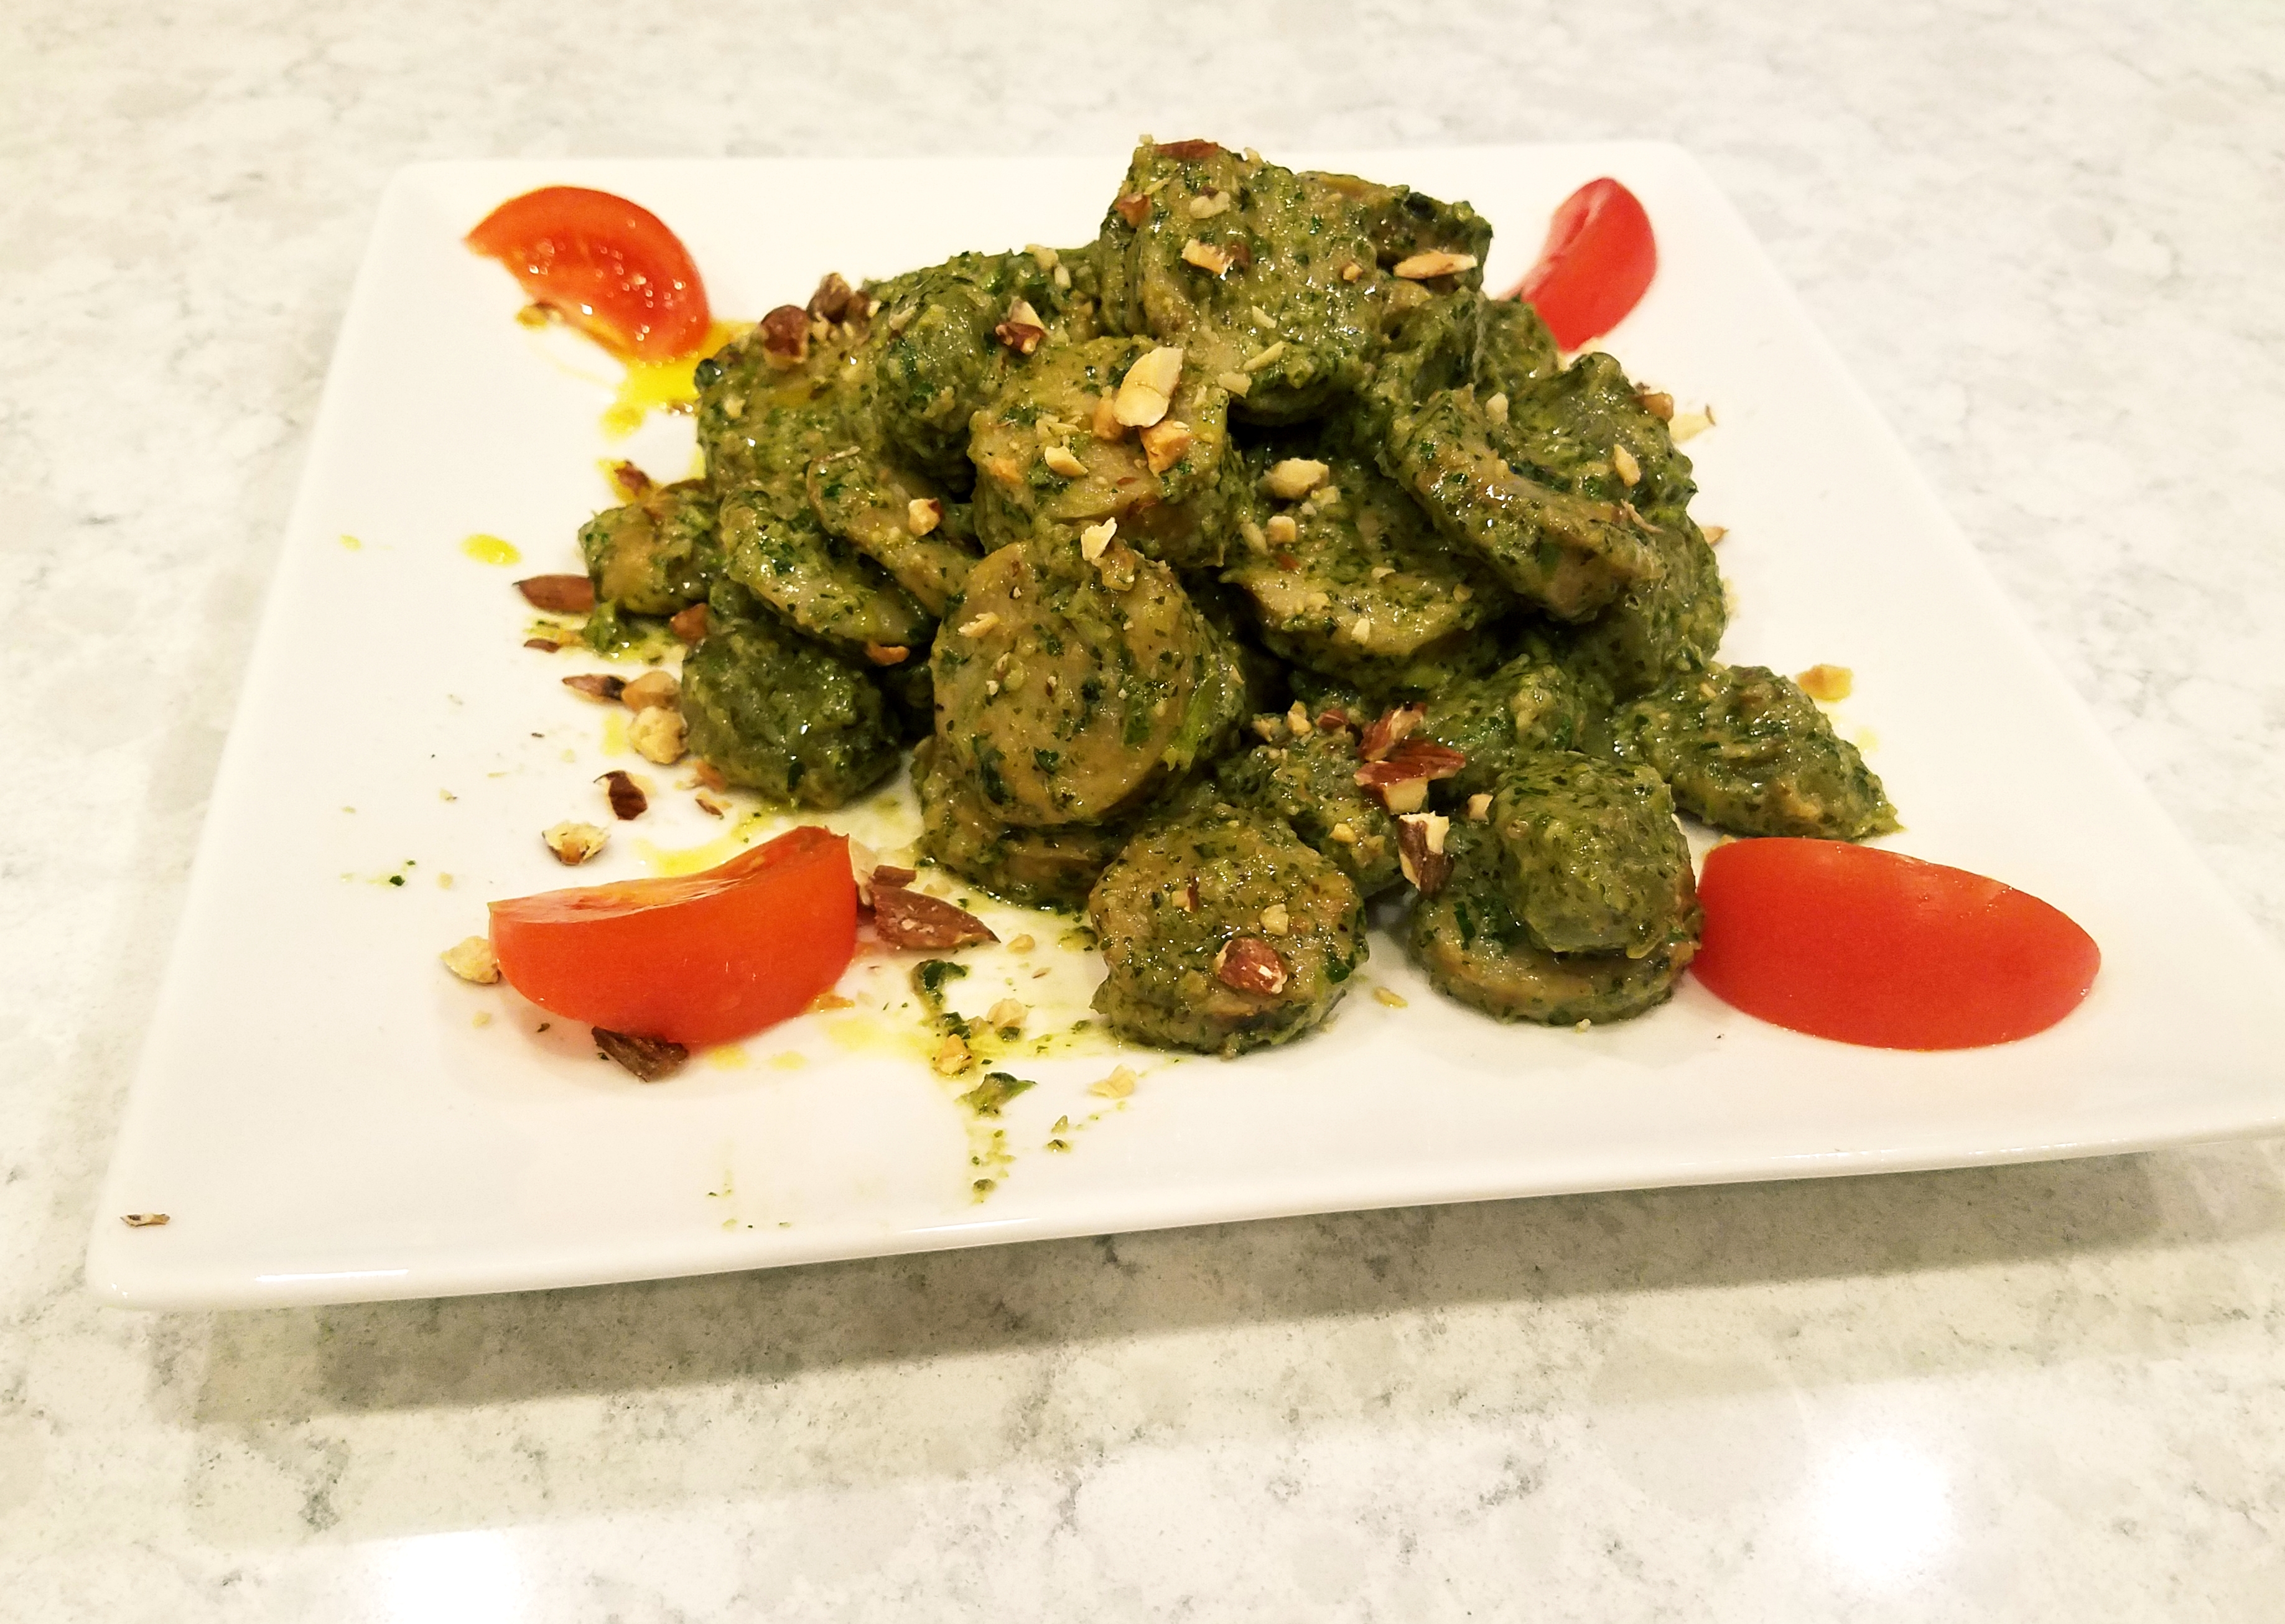 Spinach Gnocchi with Homemade Pesto in less than 30 minutes